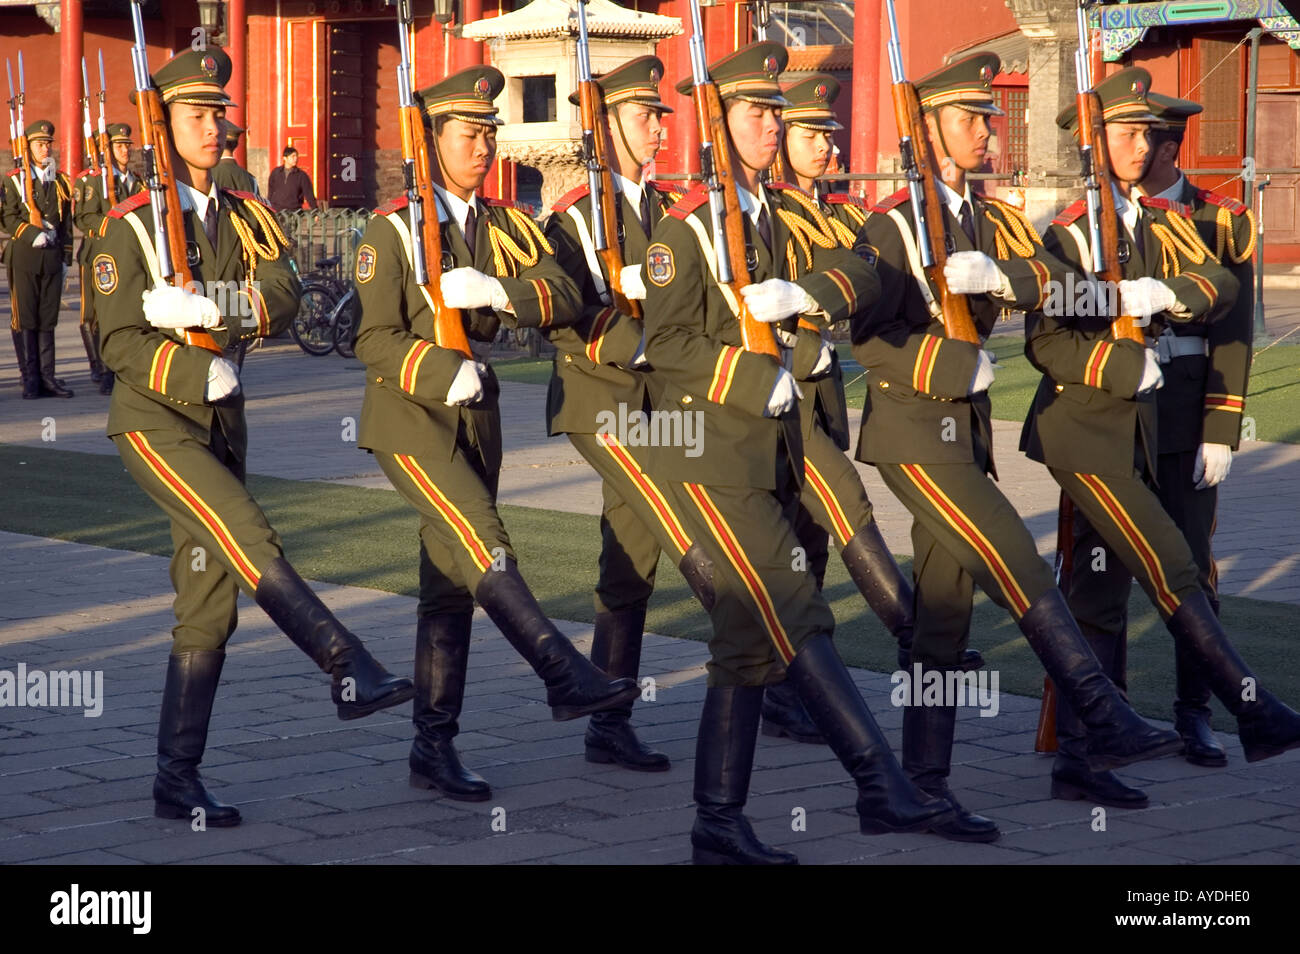 Soldiers practising military marching near Beijing’s Forbidden City and Tiananmen square, China Stock Photo